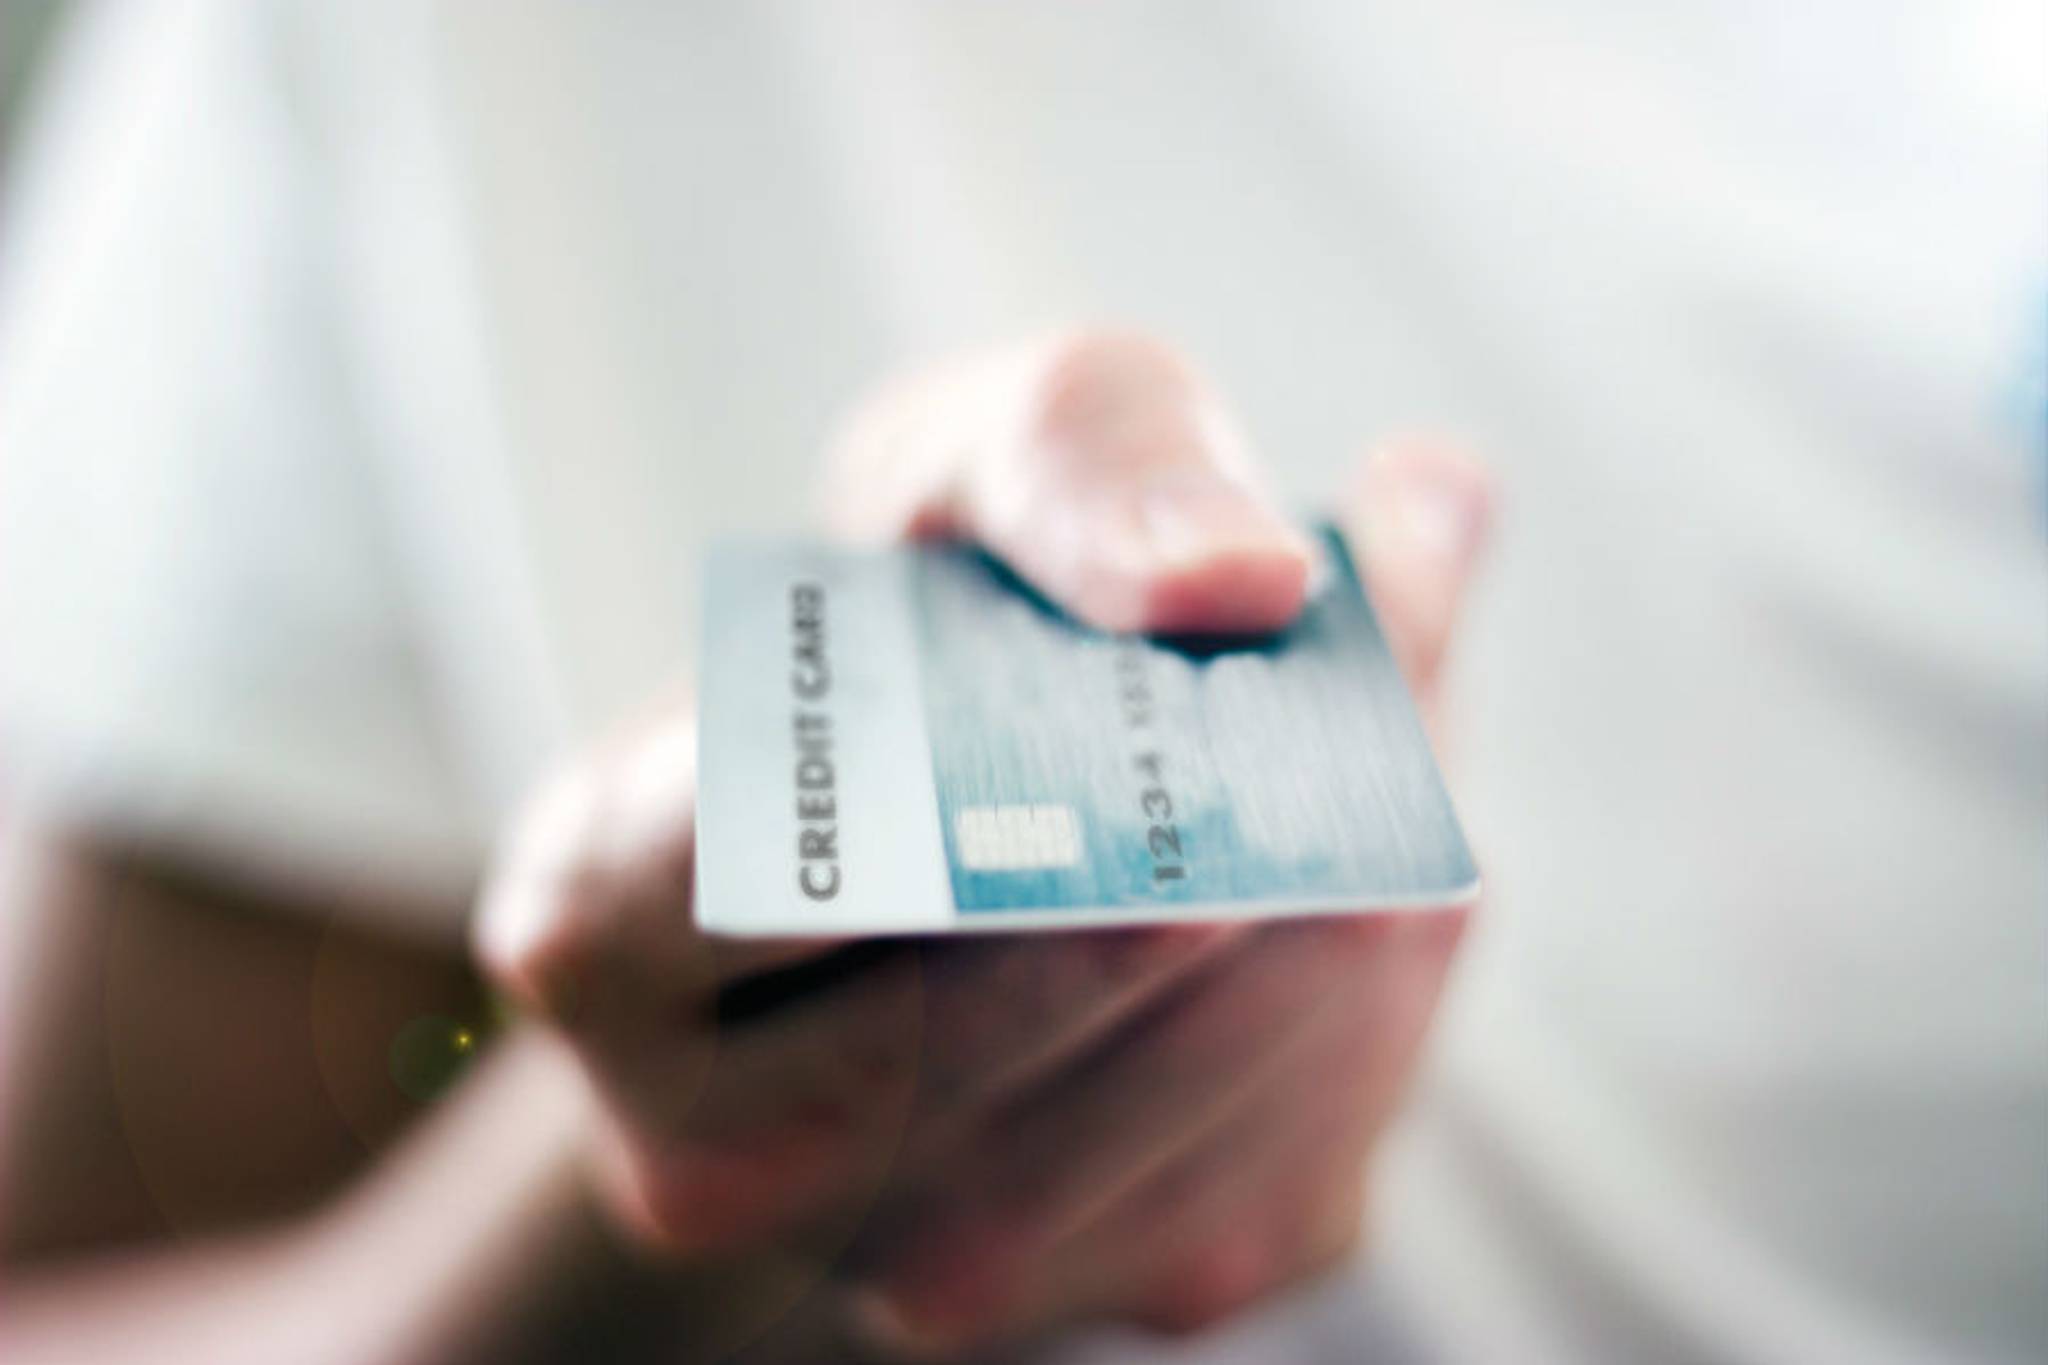 Americans use credit cards for small purchases